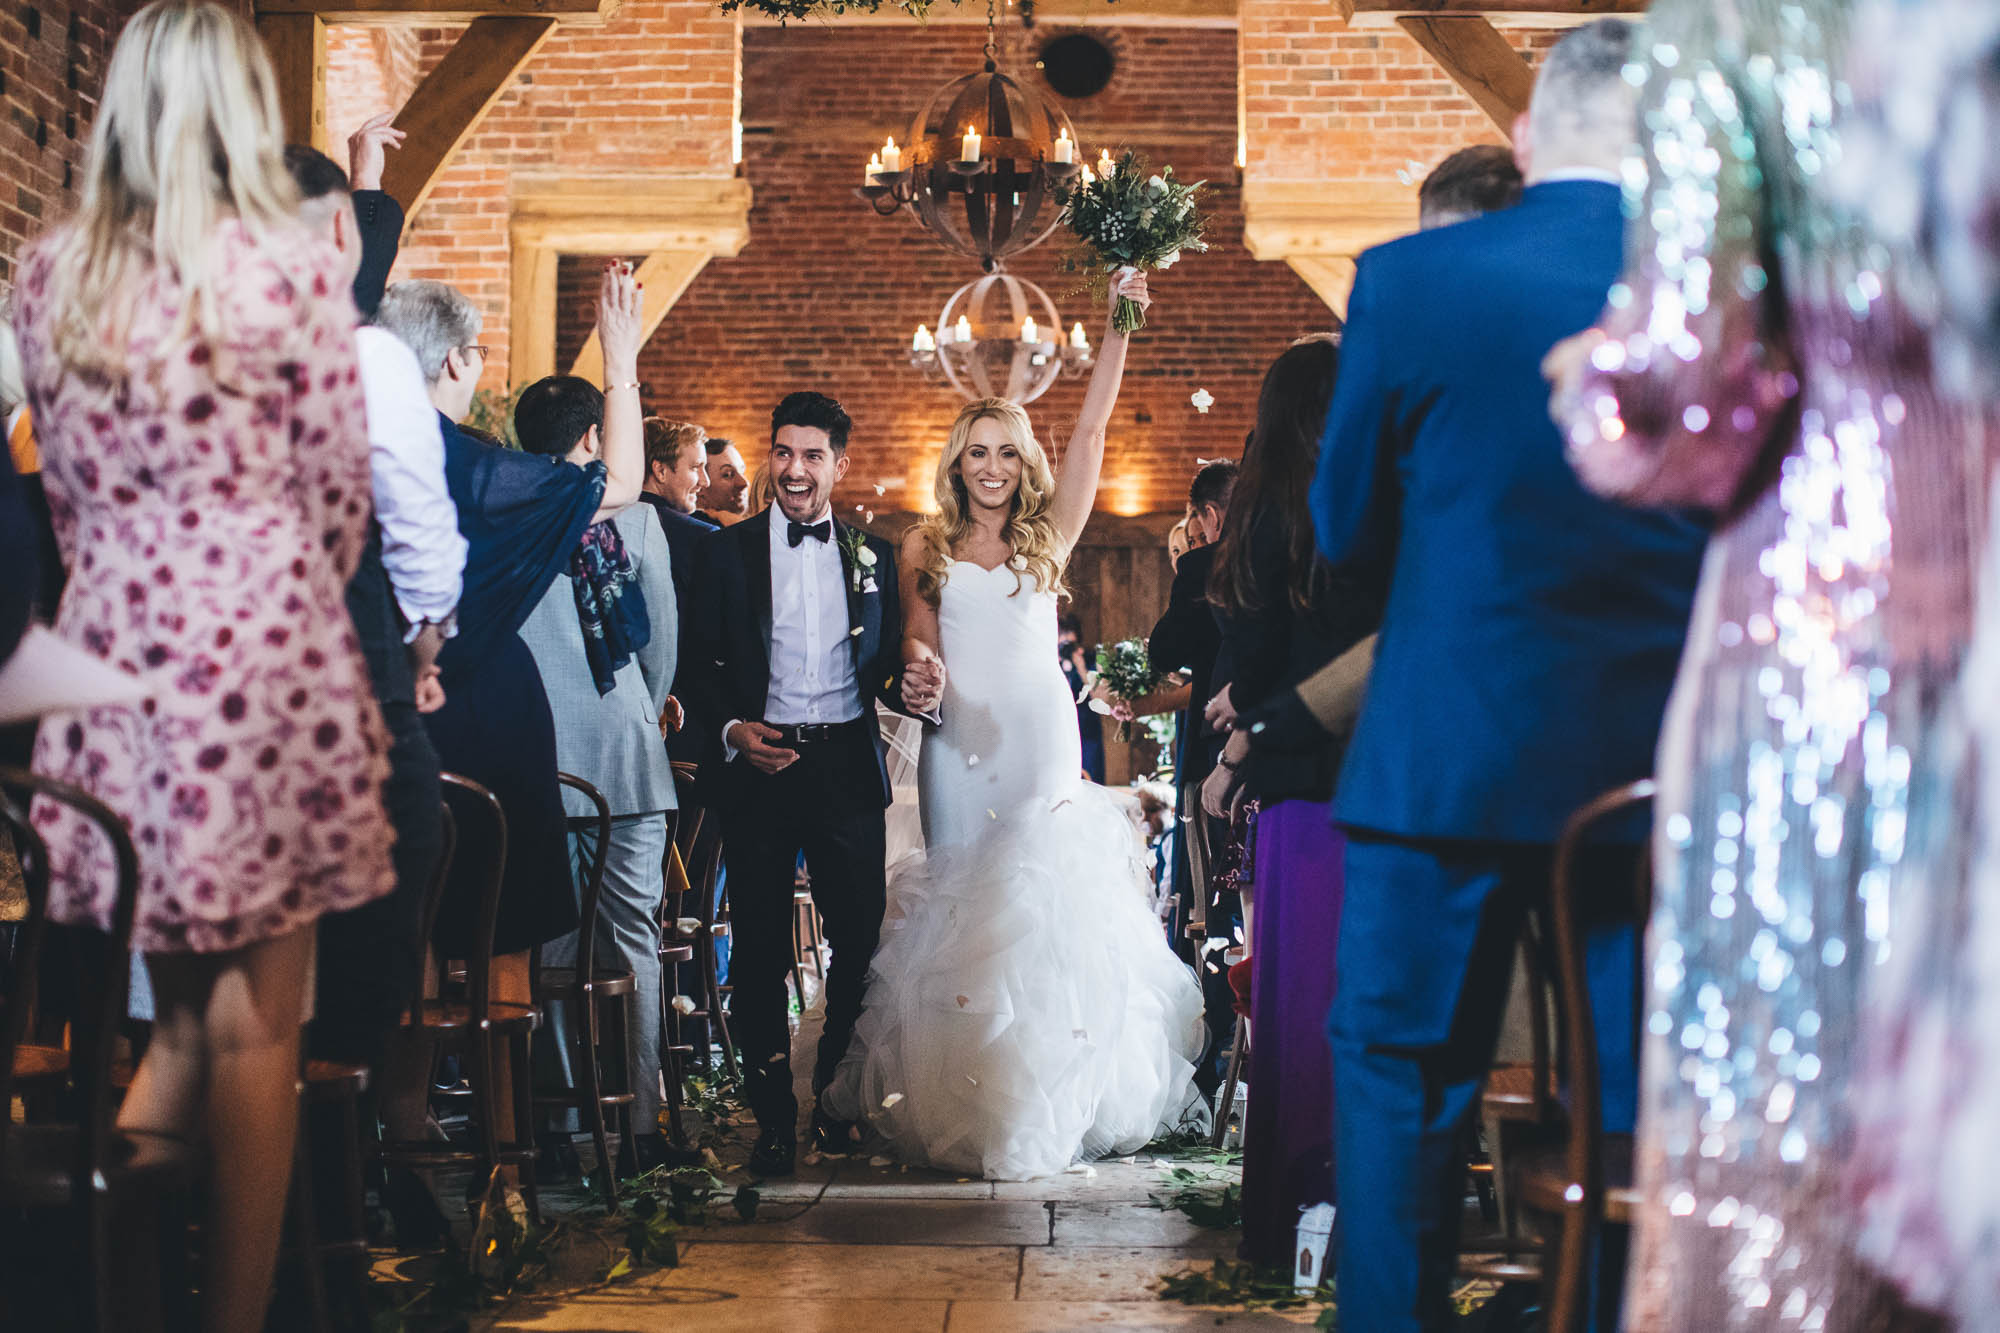 Wedding guests throw confetti over happy newlyweds as they walk back down the aisle